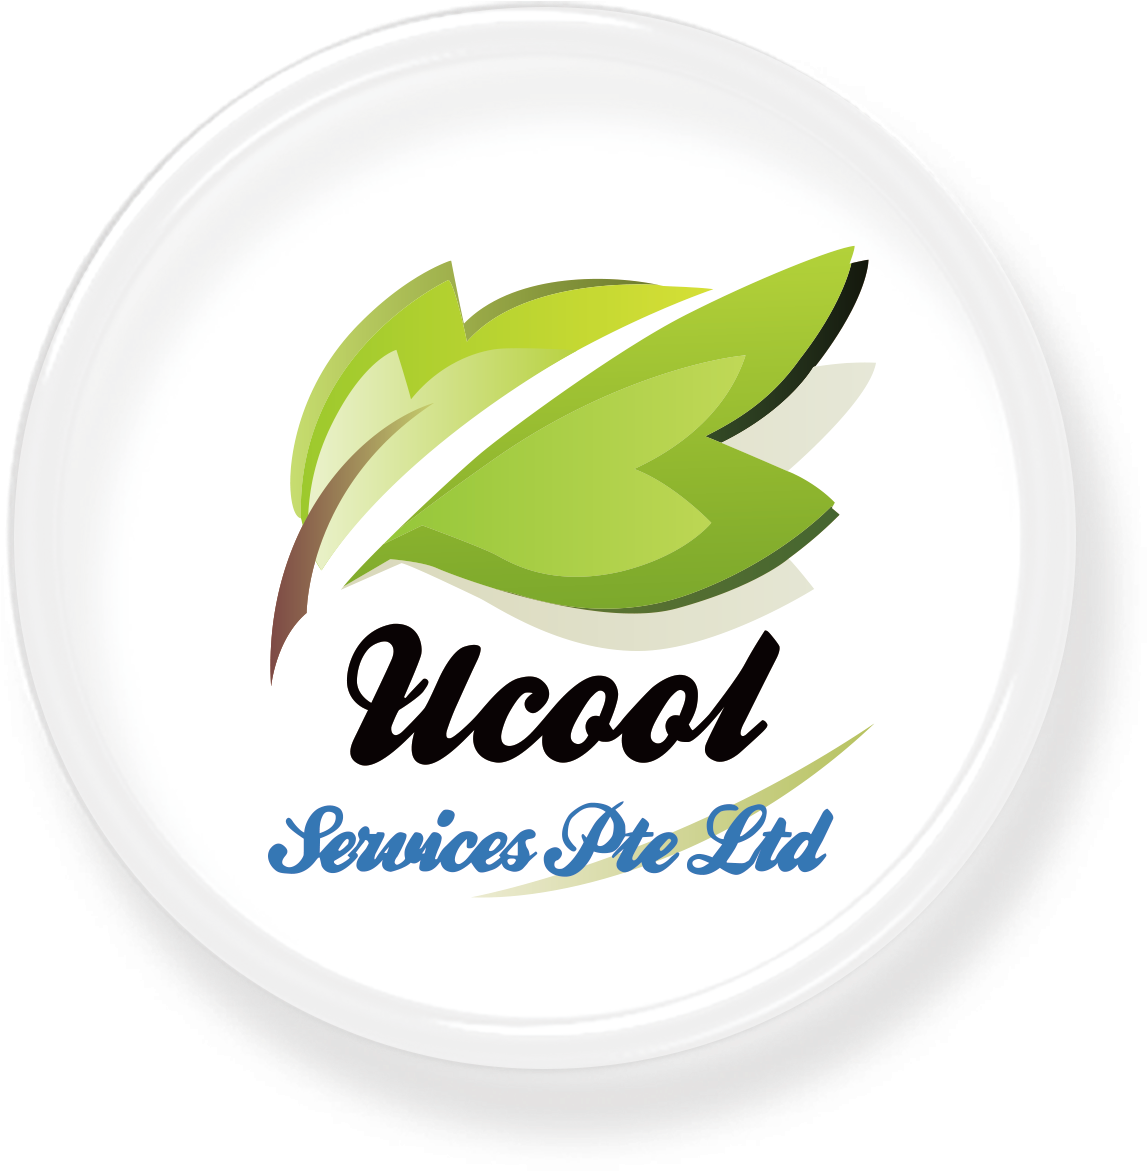 Ucool Aircon - Air Conditioning (1340x1340)